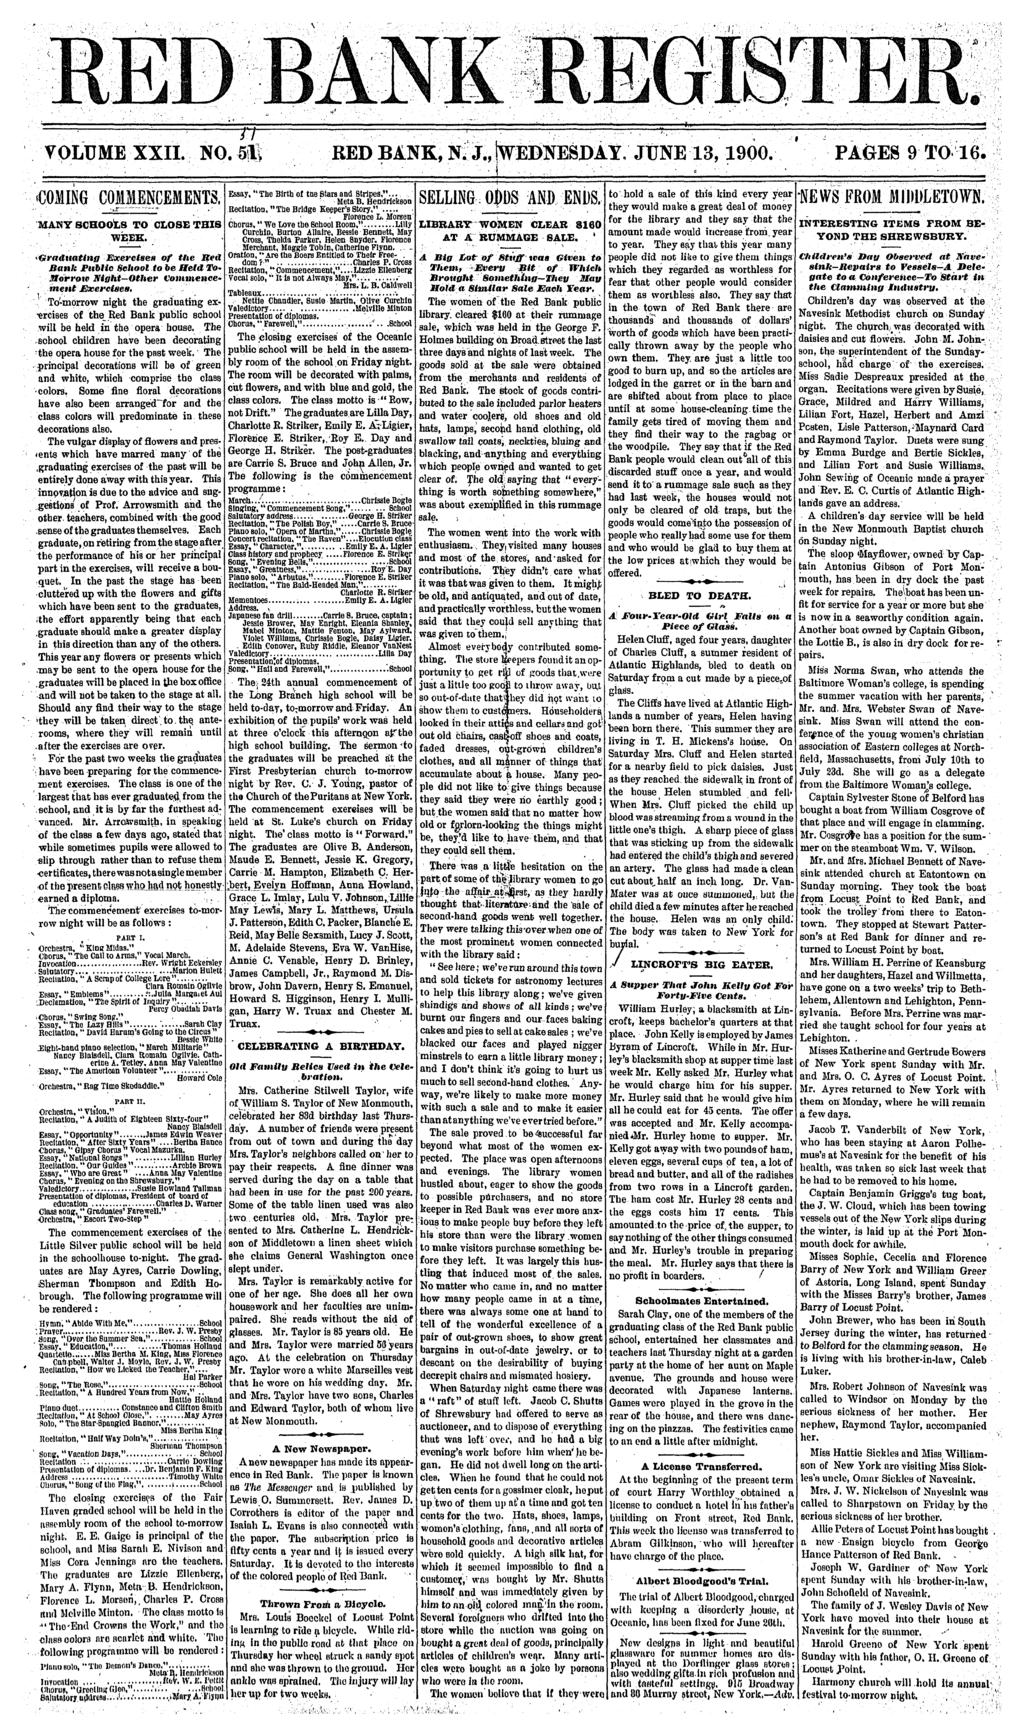 RED BANK VOLUME XXII. NO. 5l> RED BANK, N. : J., (WEDNESDAY JUNE 13,1900. PAGES 9 TO 16. COMING COMMENCEMENTS, MANY SCHOOLS TO CLOSE THIS ;./ WEEK.